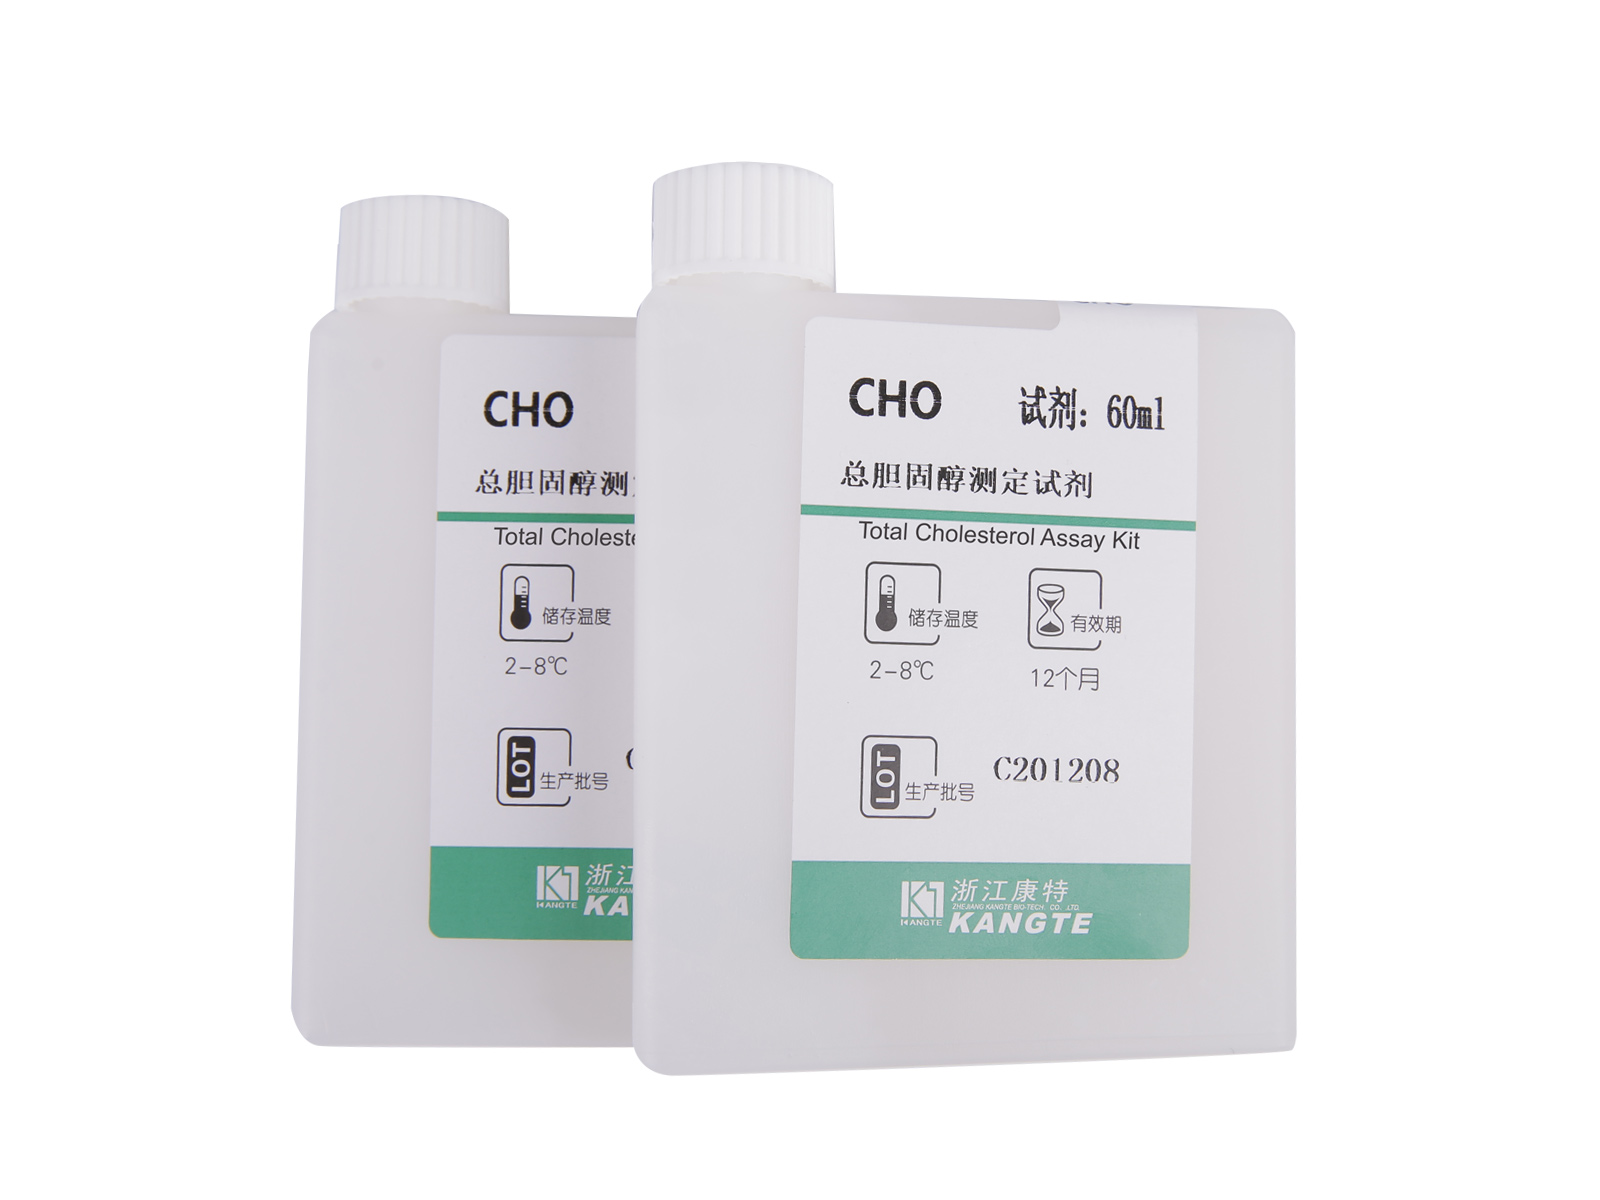 detail of 【CHO】Totale cholesteroltestkit (CHOD-PAP-methode)